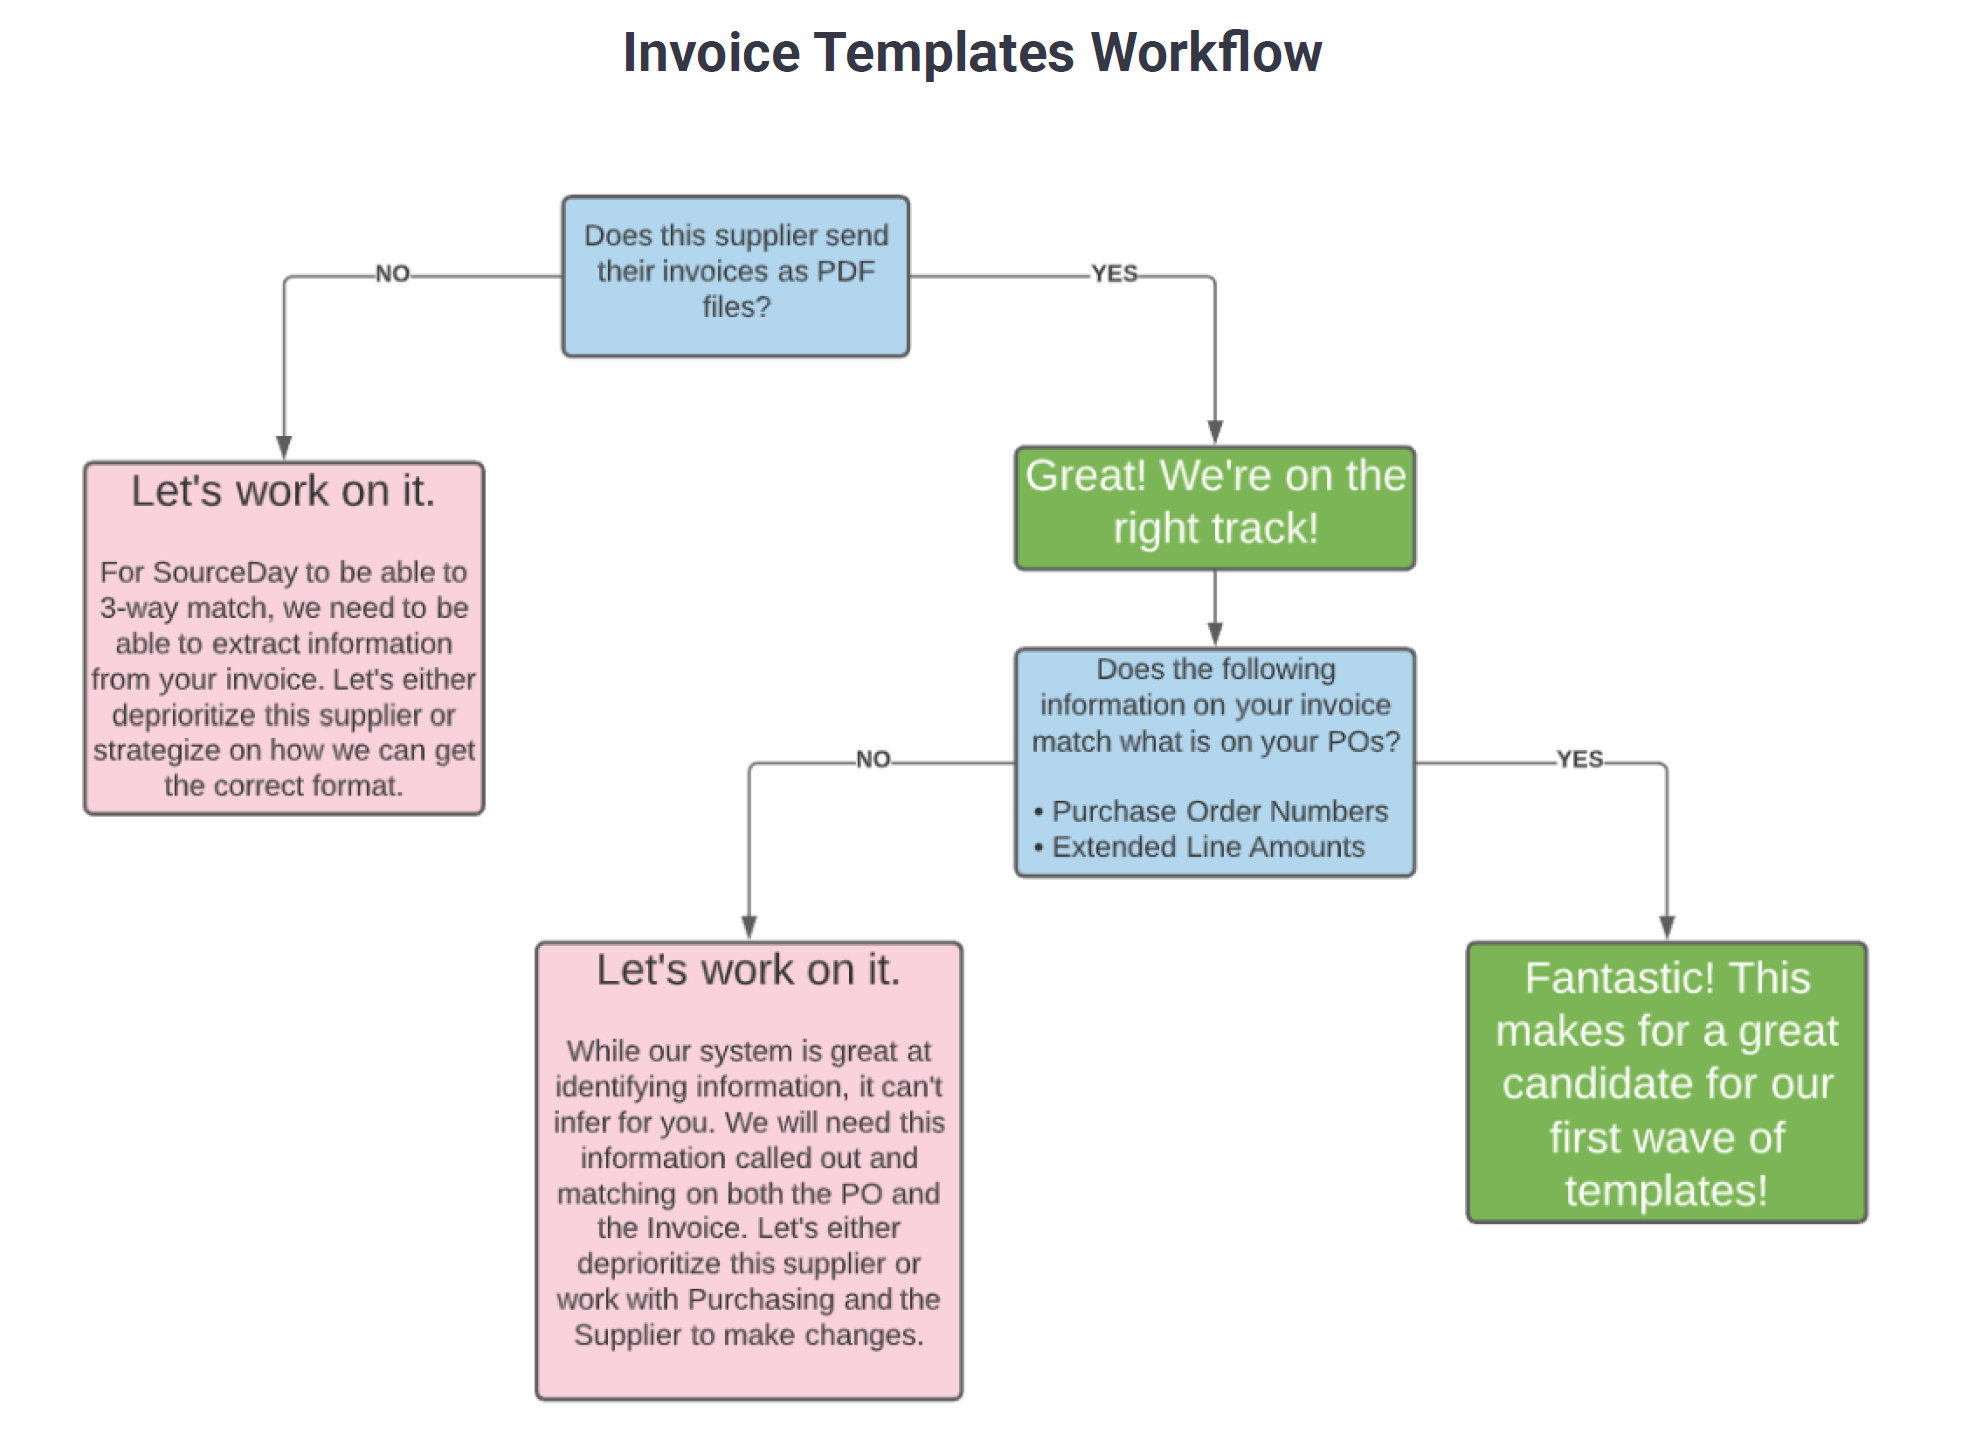 invoice_templates_workflow.png